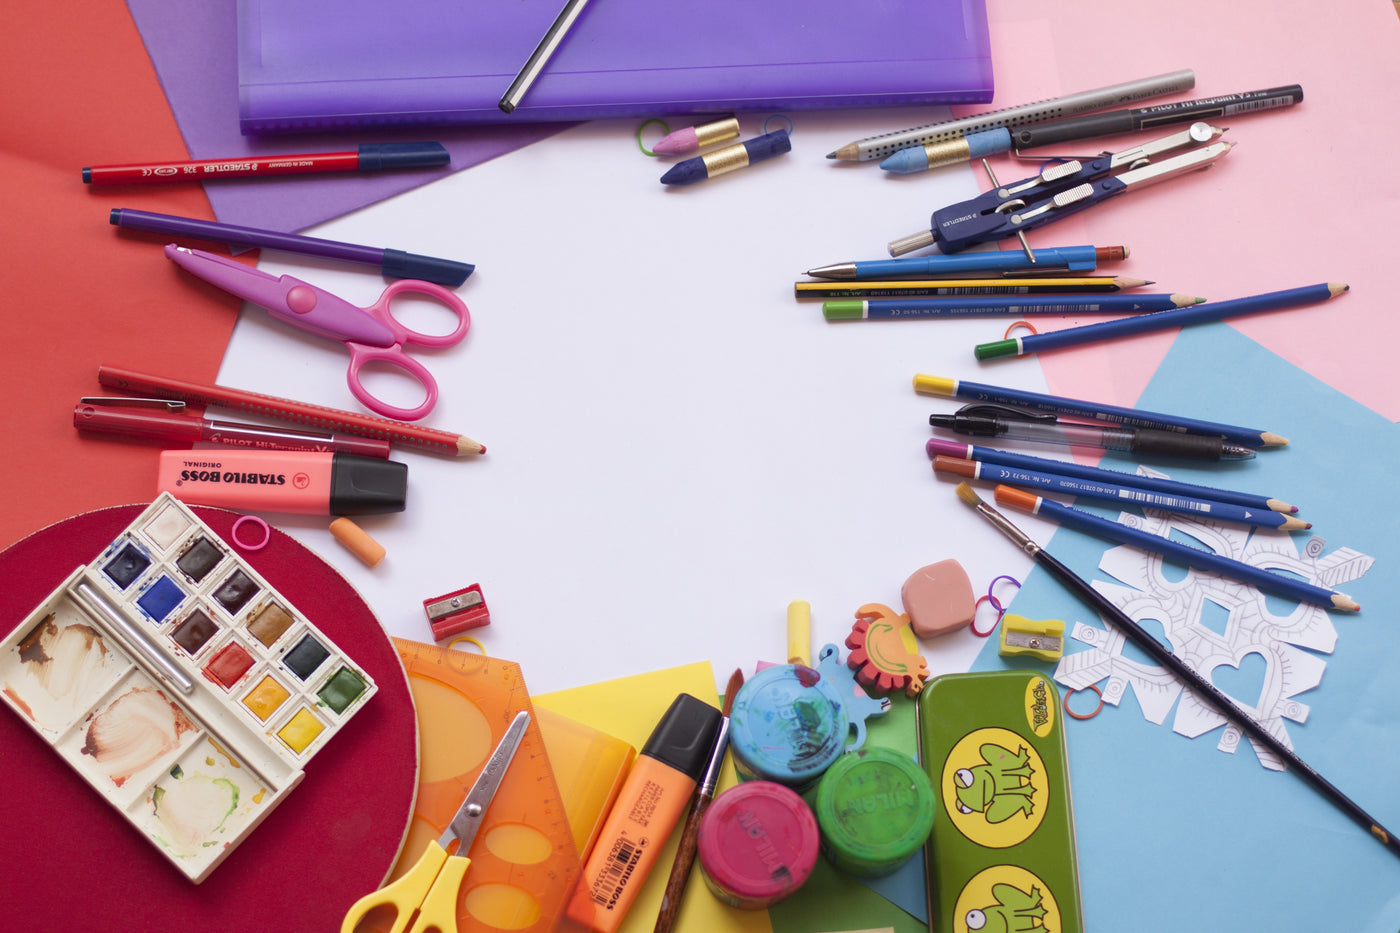 How to Start Using Your Stationery Collection (and Stop Hoarding): A Comprehensive Guide